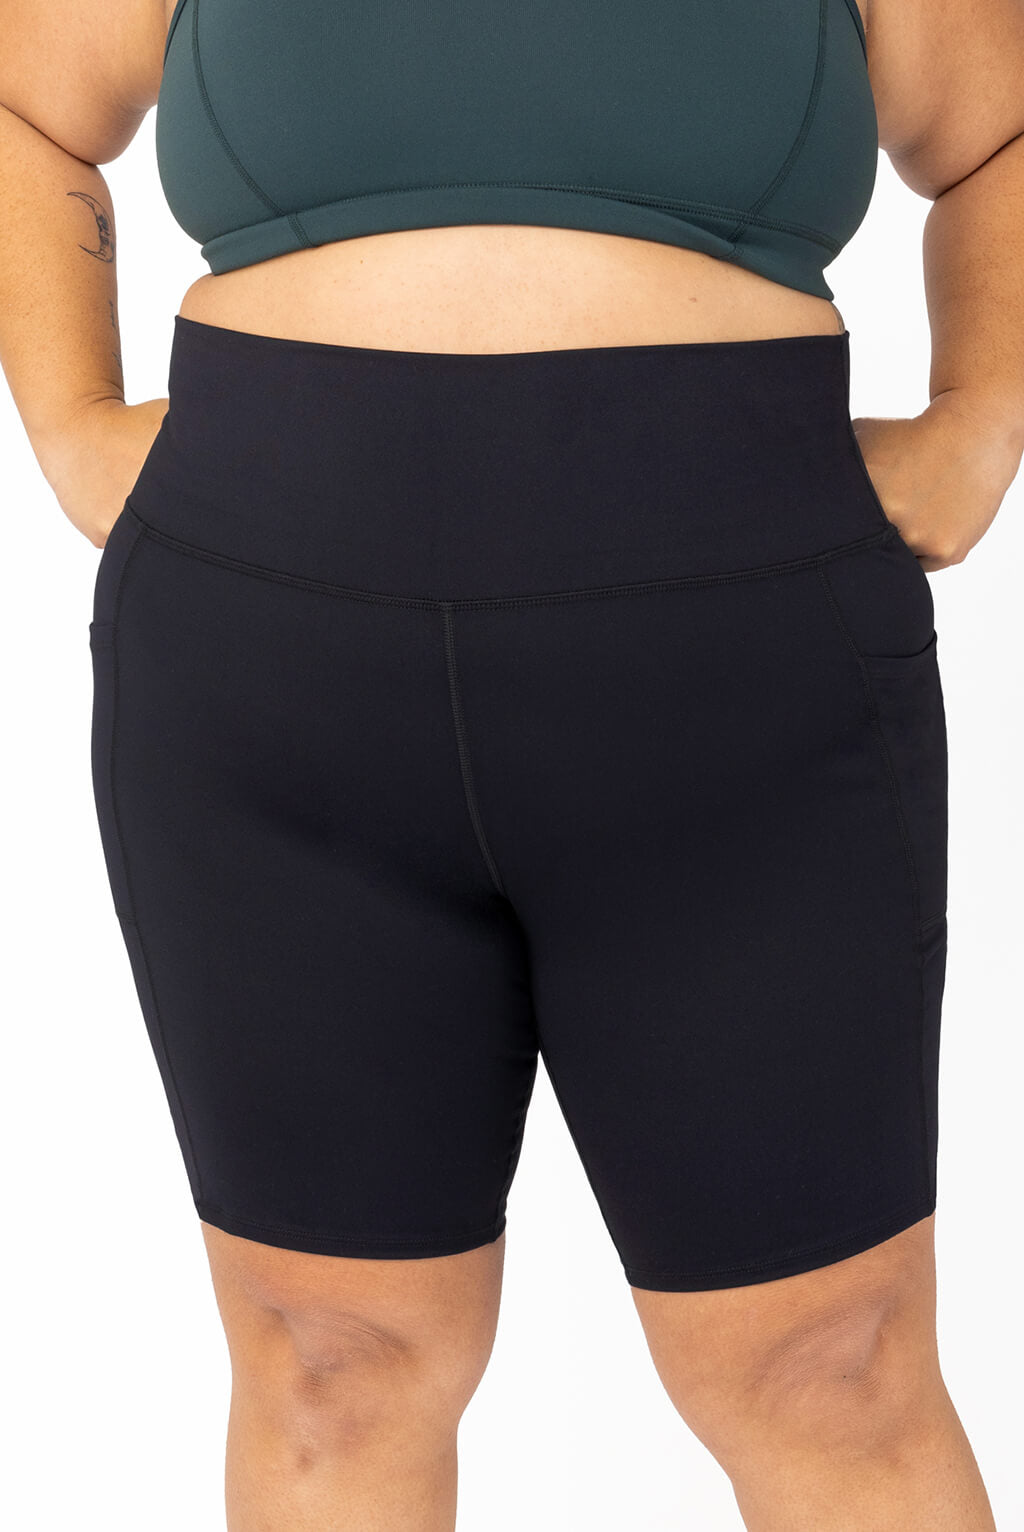 Refinery 29 - These Are Some Of The Coolest Plus-Size Bike Shorts